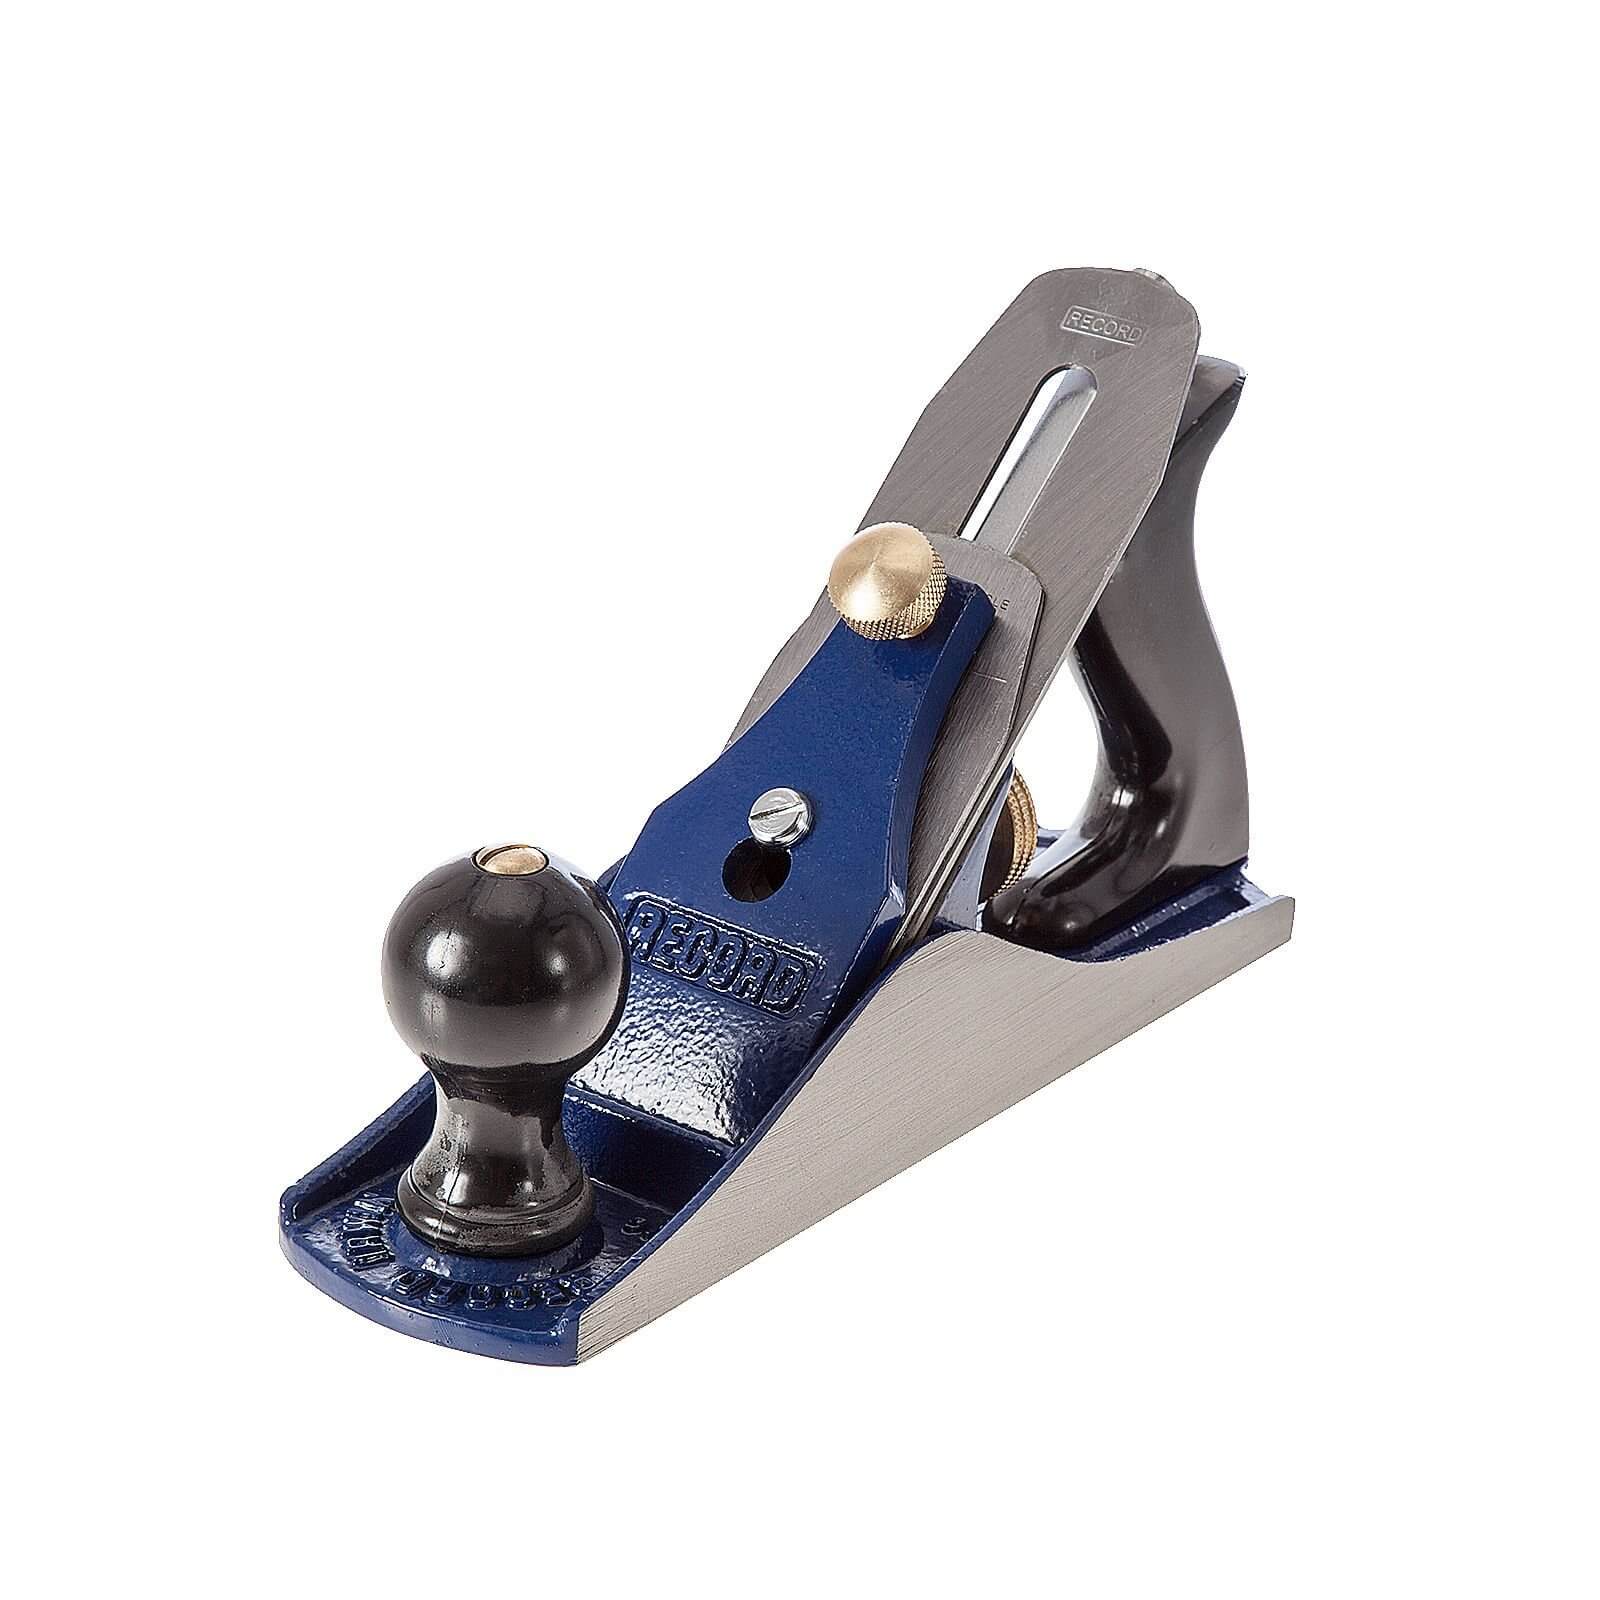 Irwin Record Sp4 Smoothing Plane 50mm